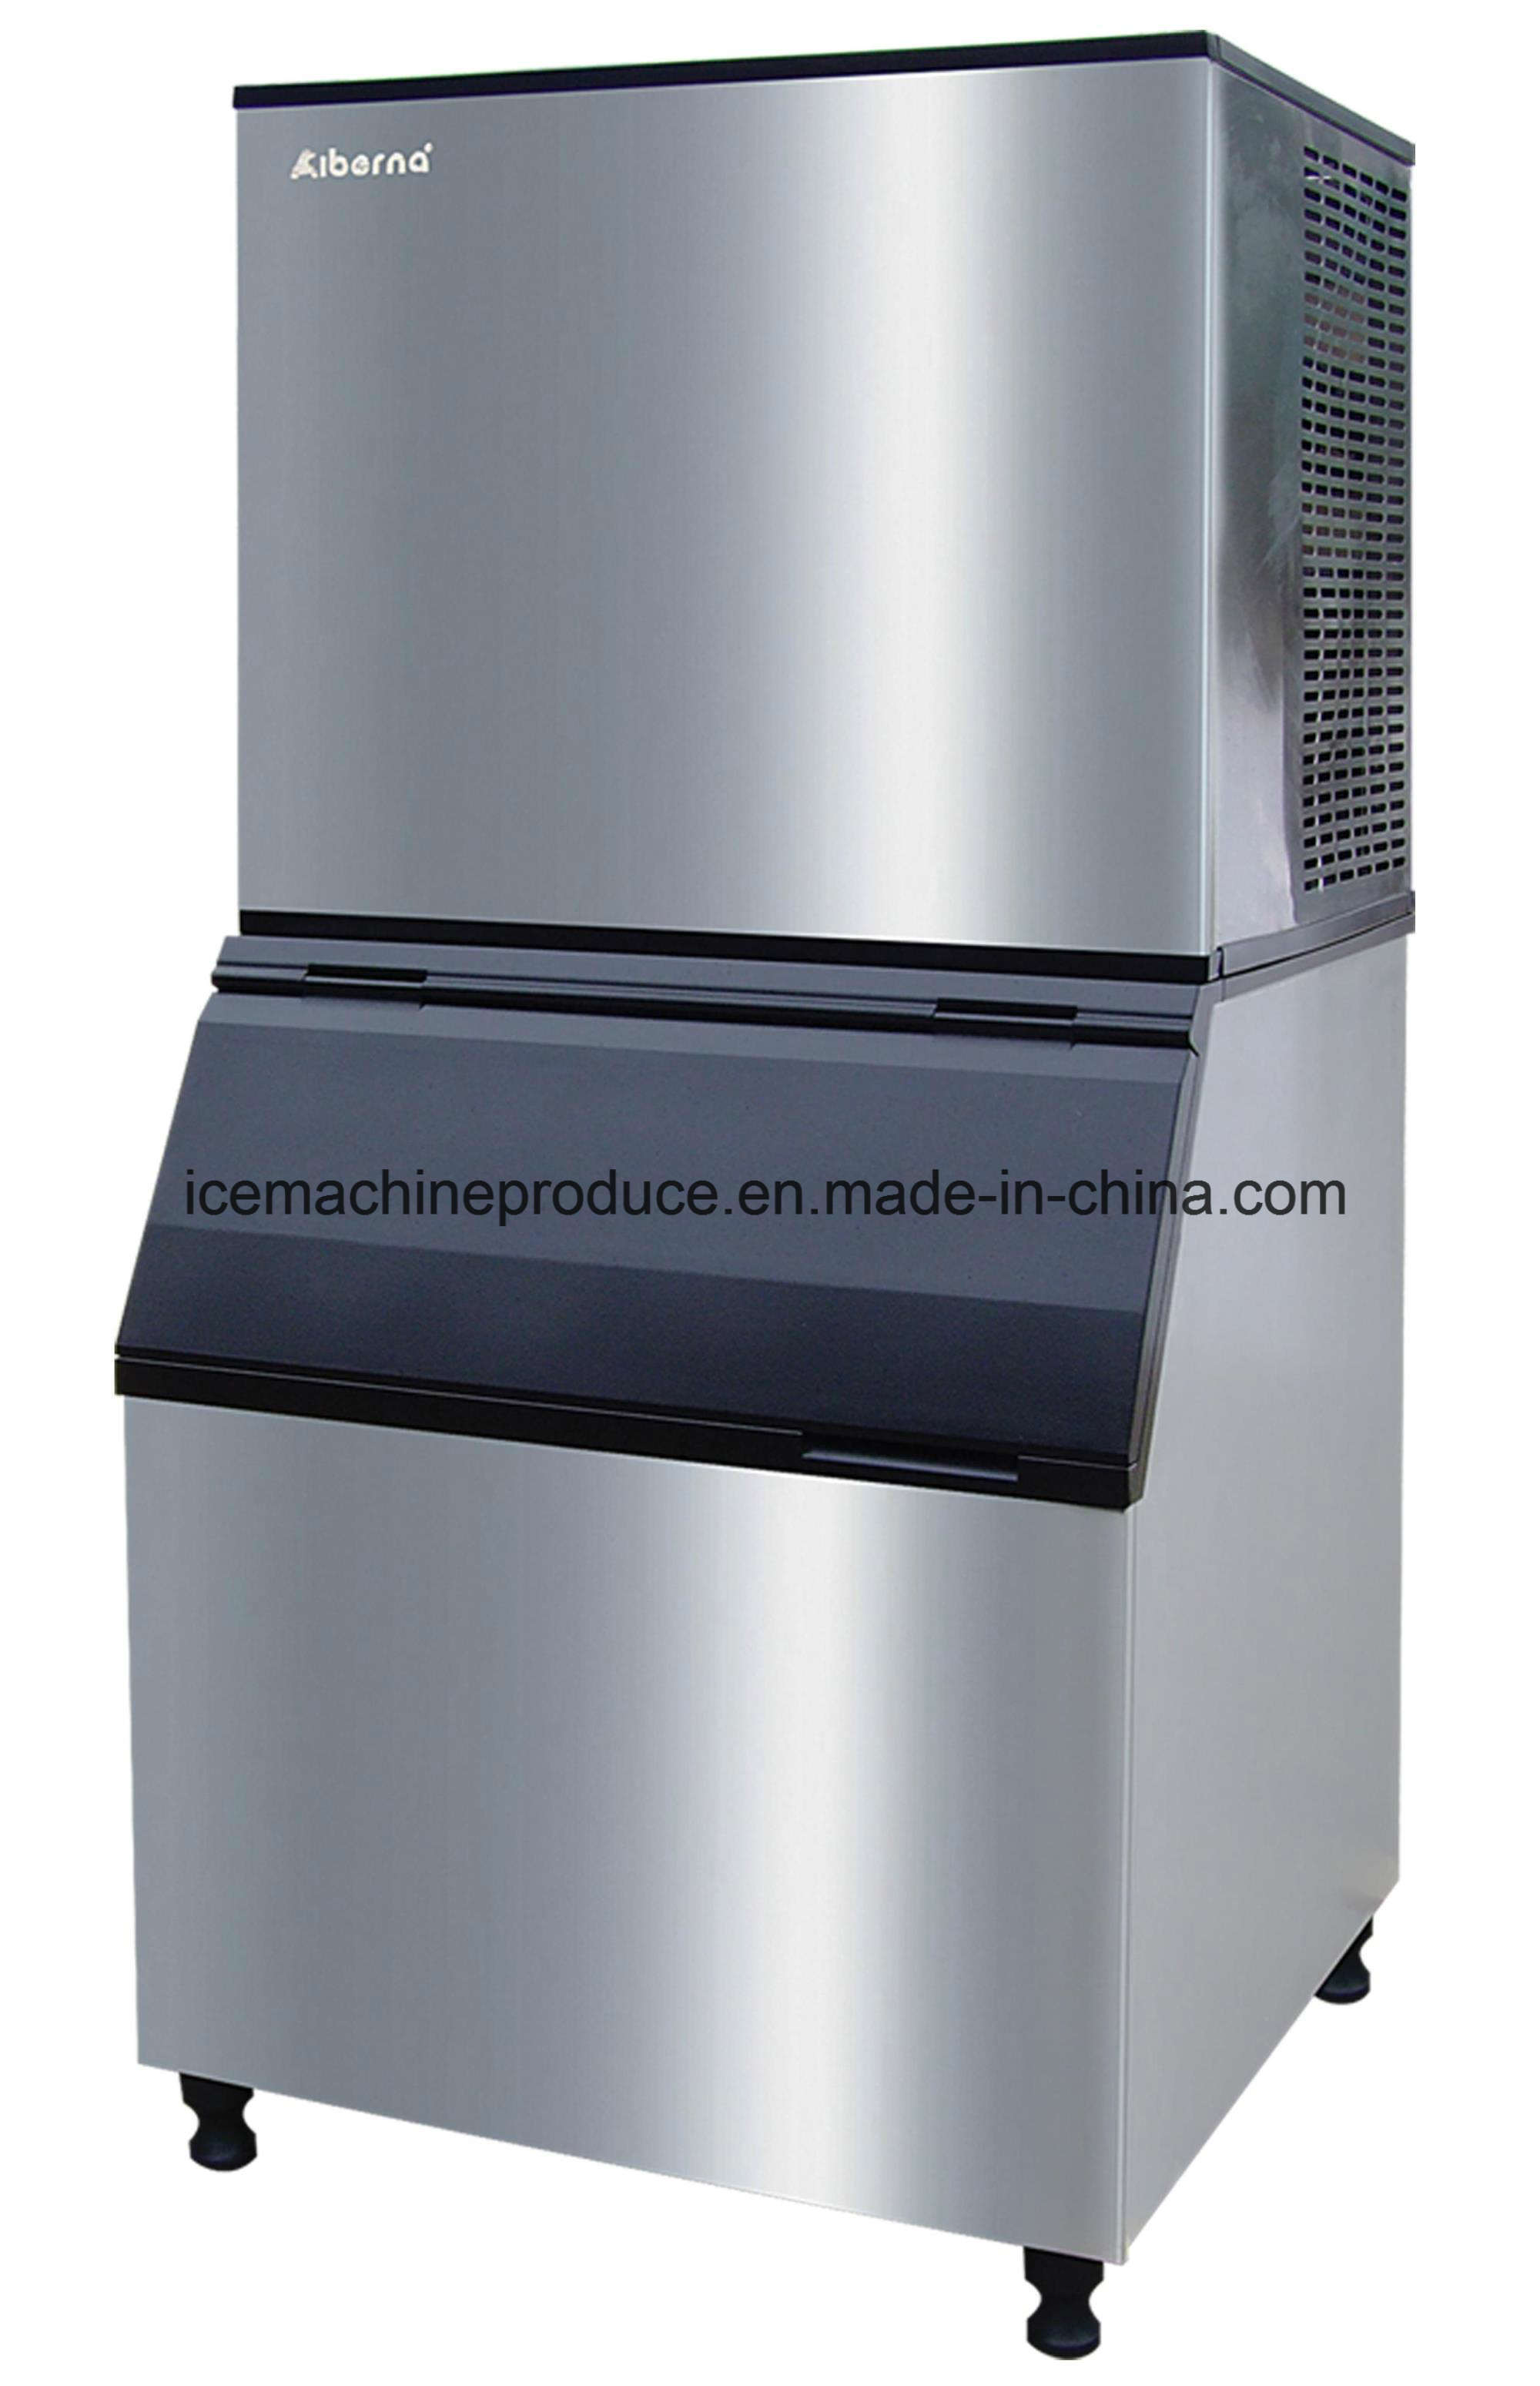 150 Kilogram Ice Making Machine Suitable for The Tropical Environment